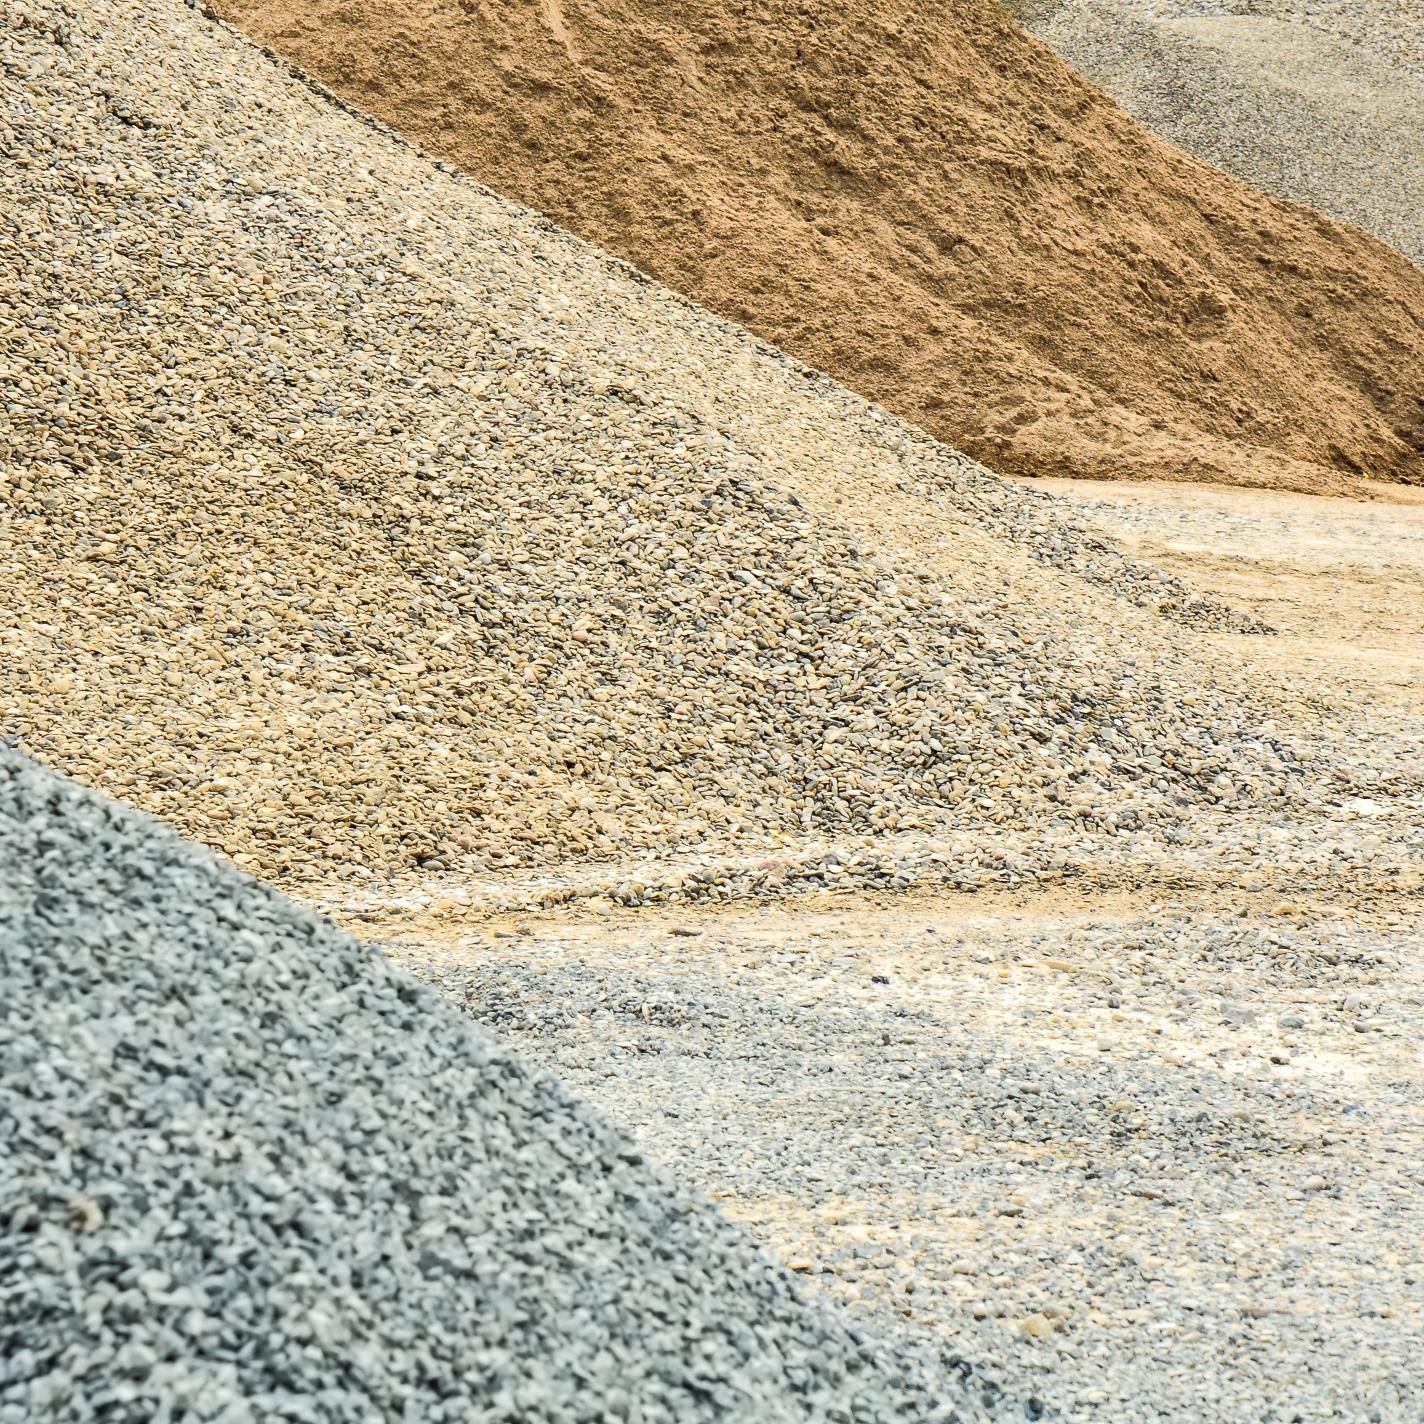 There are many different types of gravel in this pile.